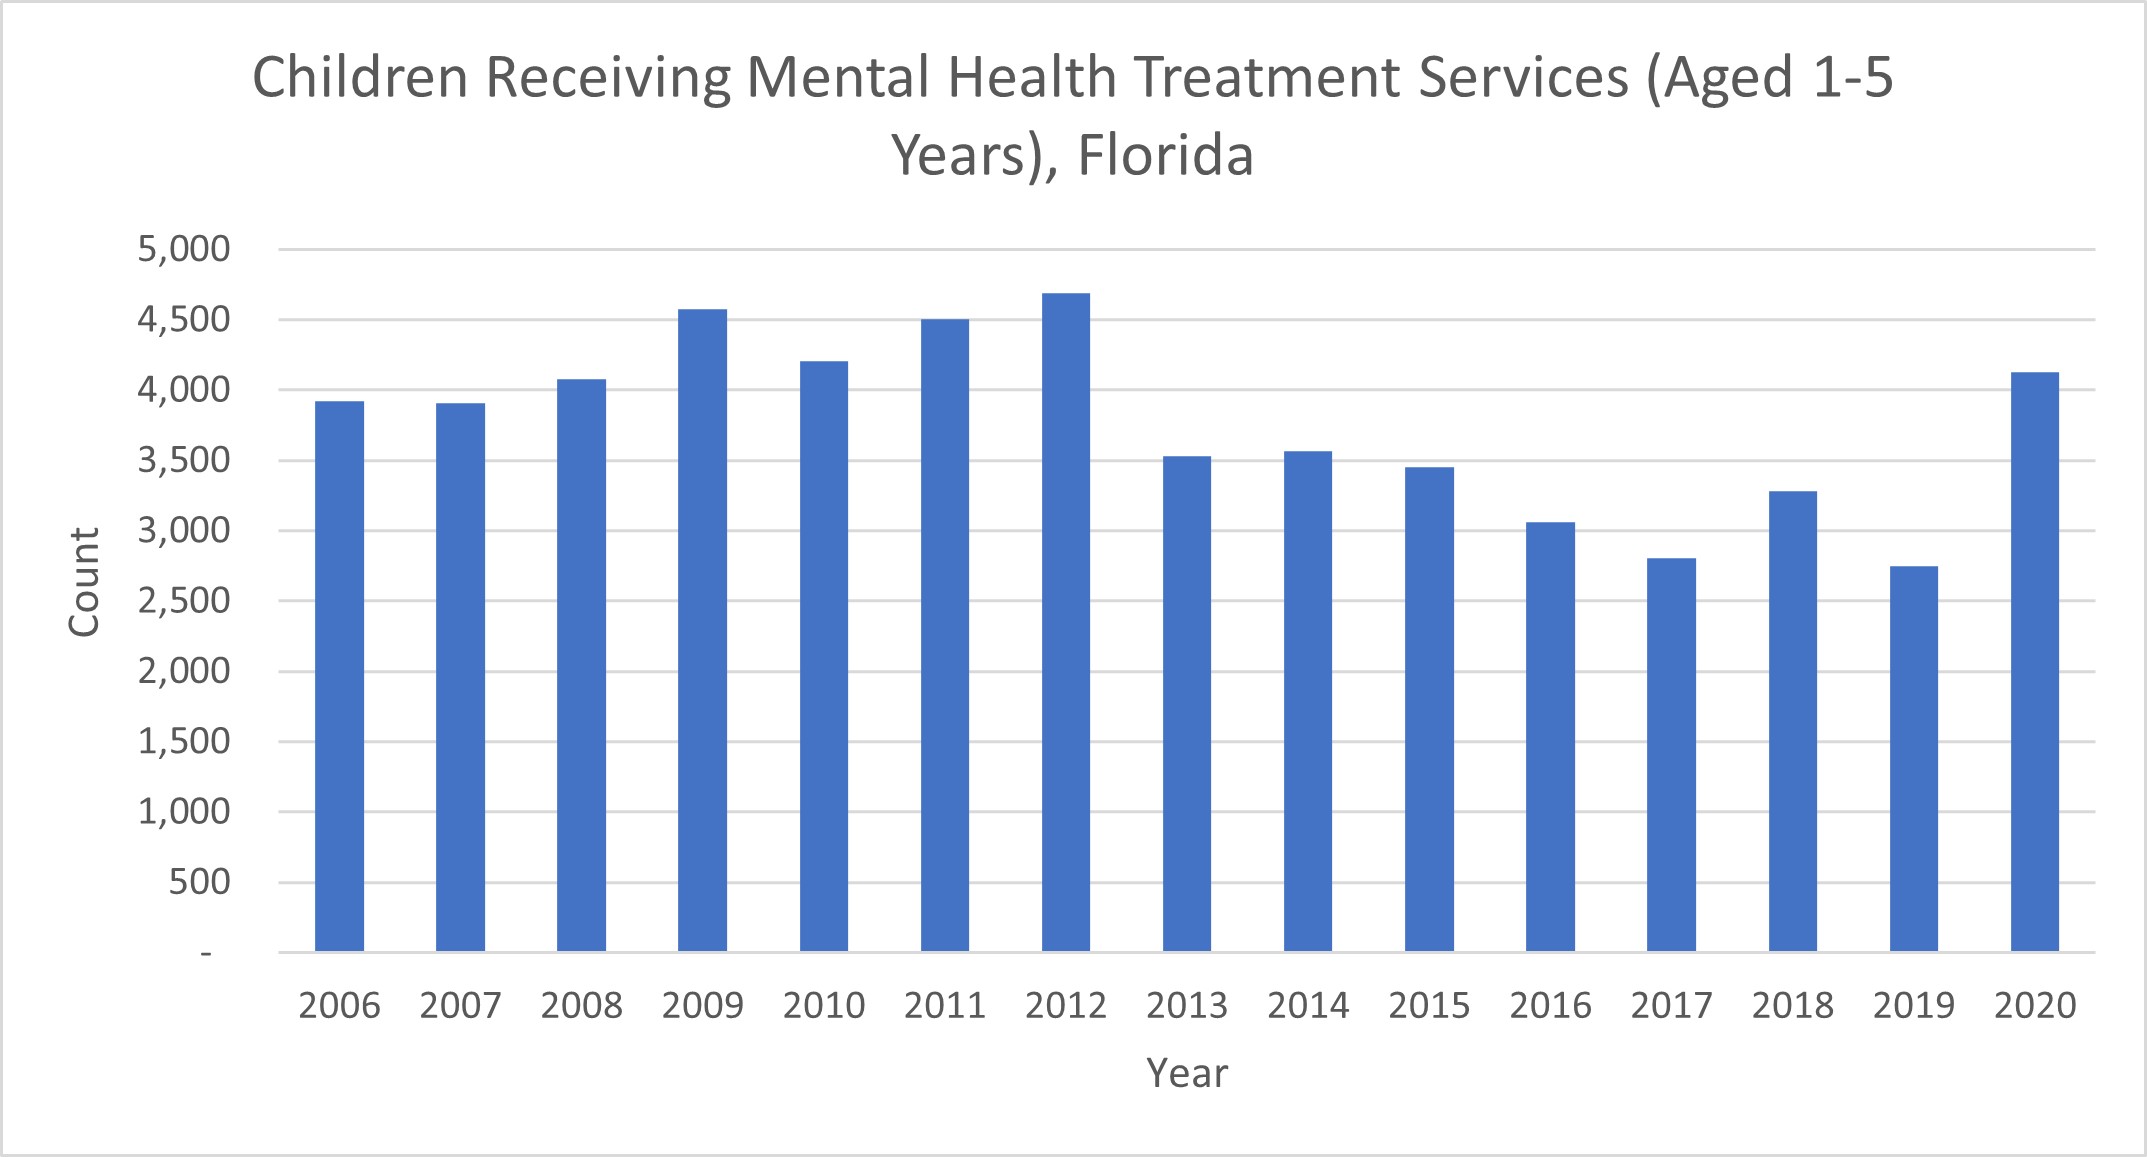 Children Receiving Mental Health Treatment Services (Aged 1-5 Years), Florida